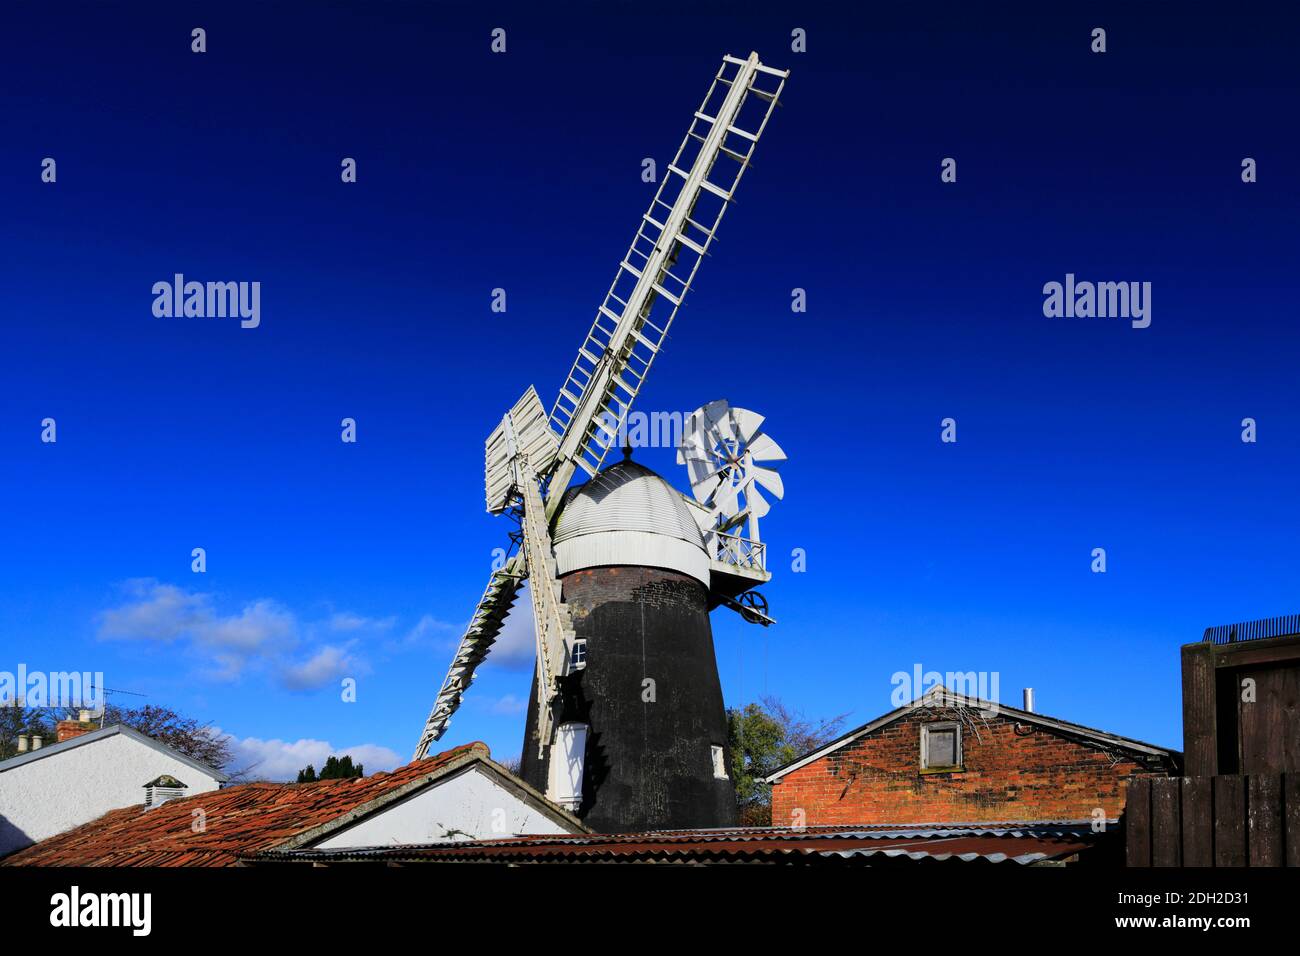 View of Bardwell Windmill, a Grade II listed tower mill, Bardwell village, Suffolk county, England, UK Stock Photo